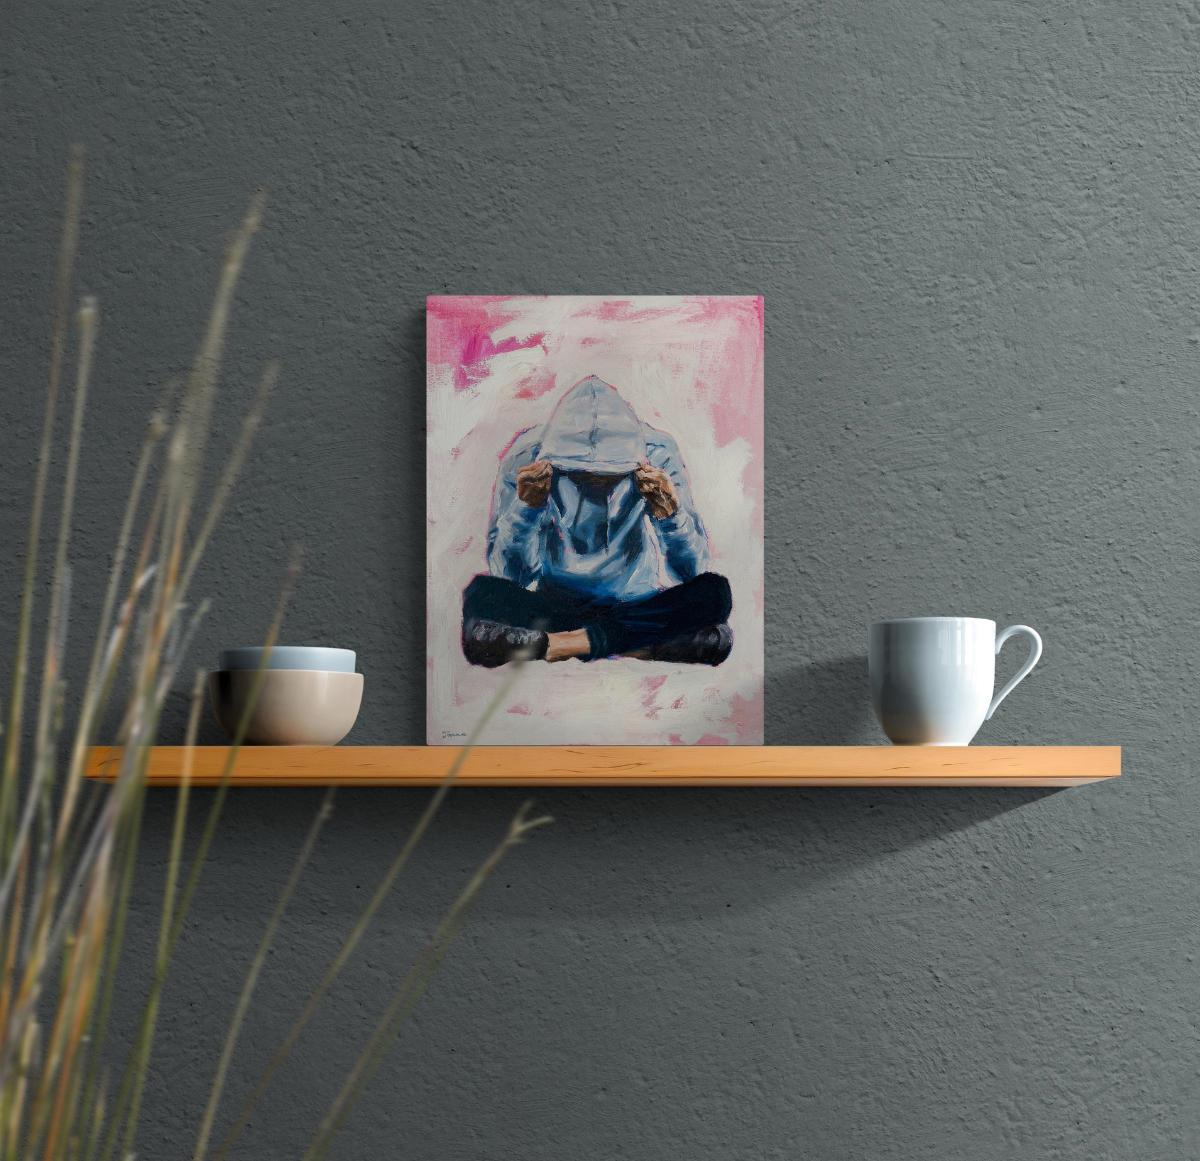 small painting of a person seated cross-legged and looking downwards